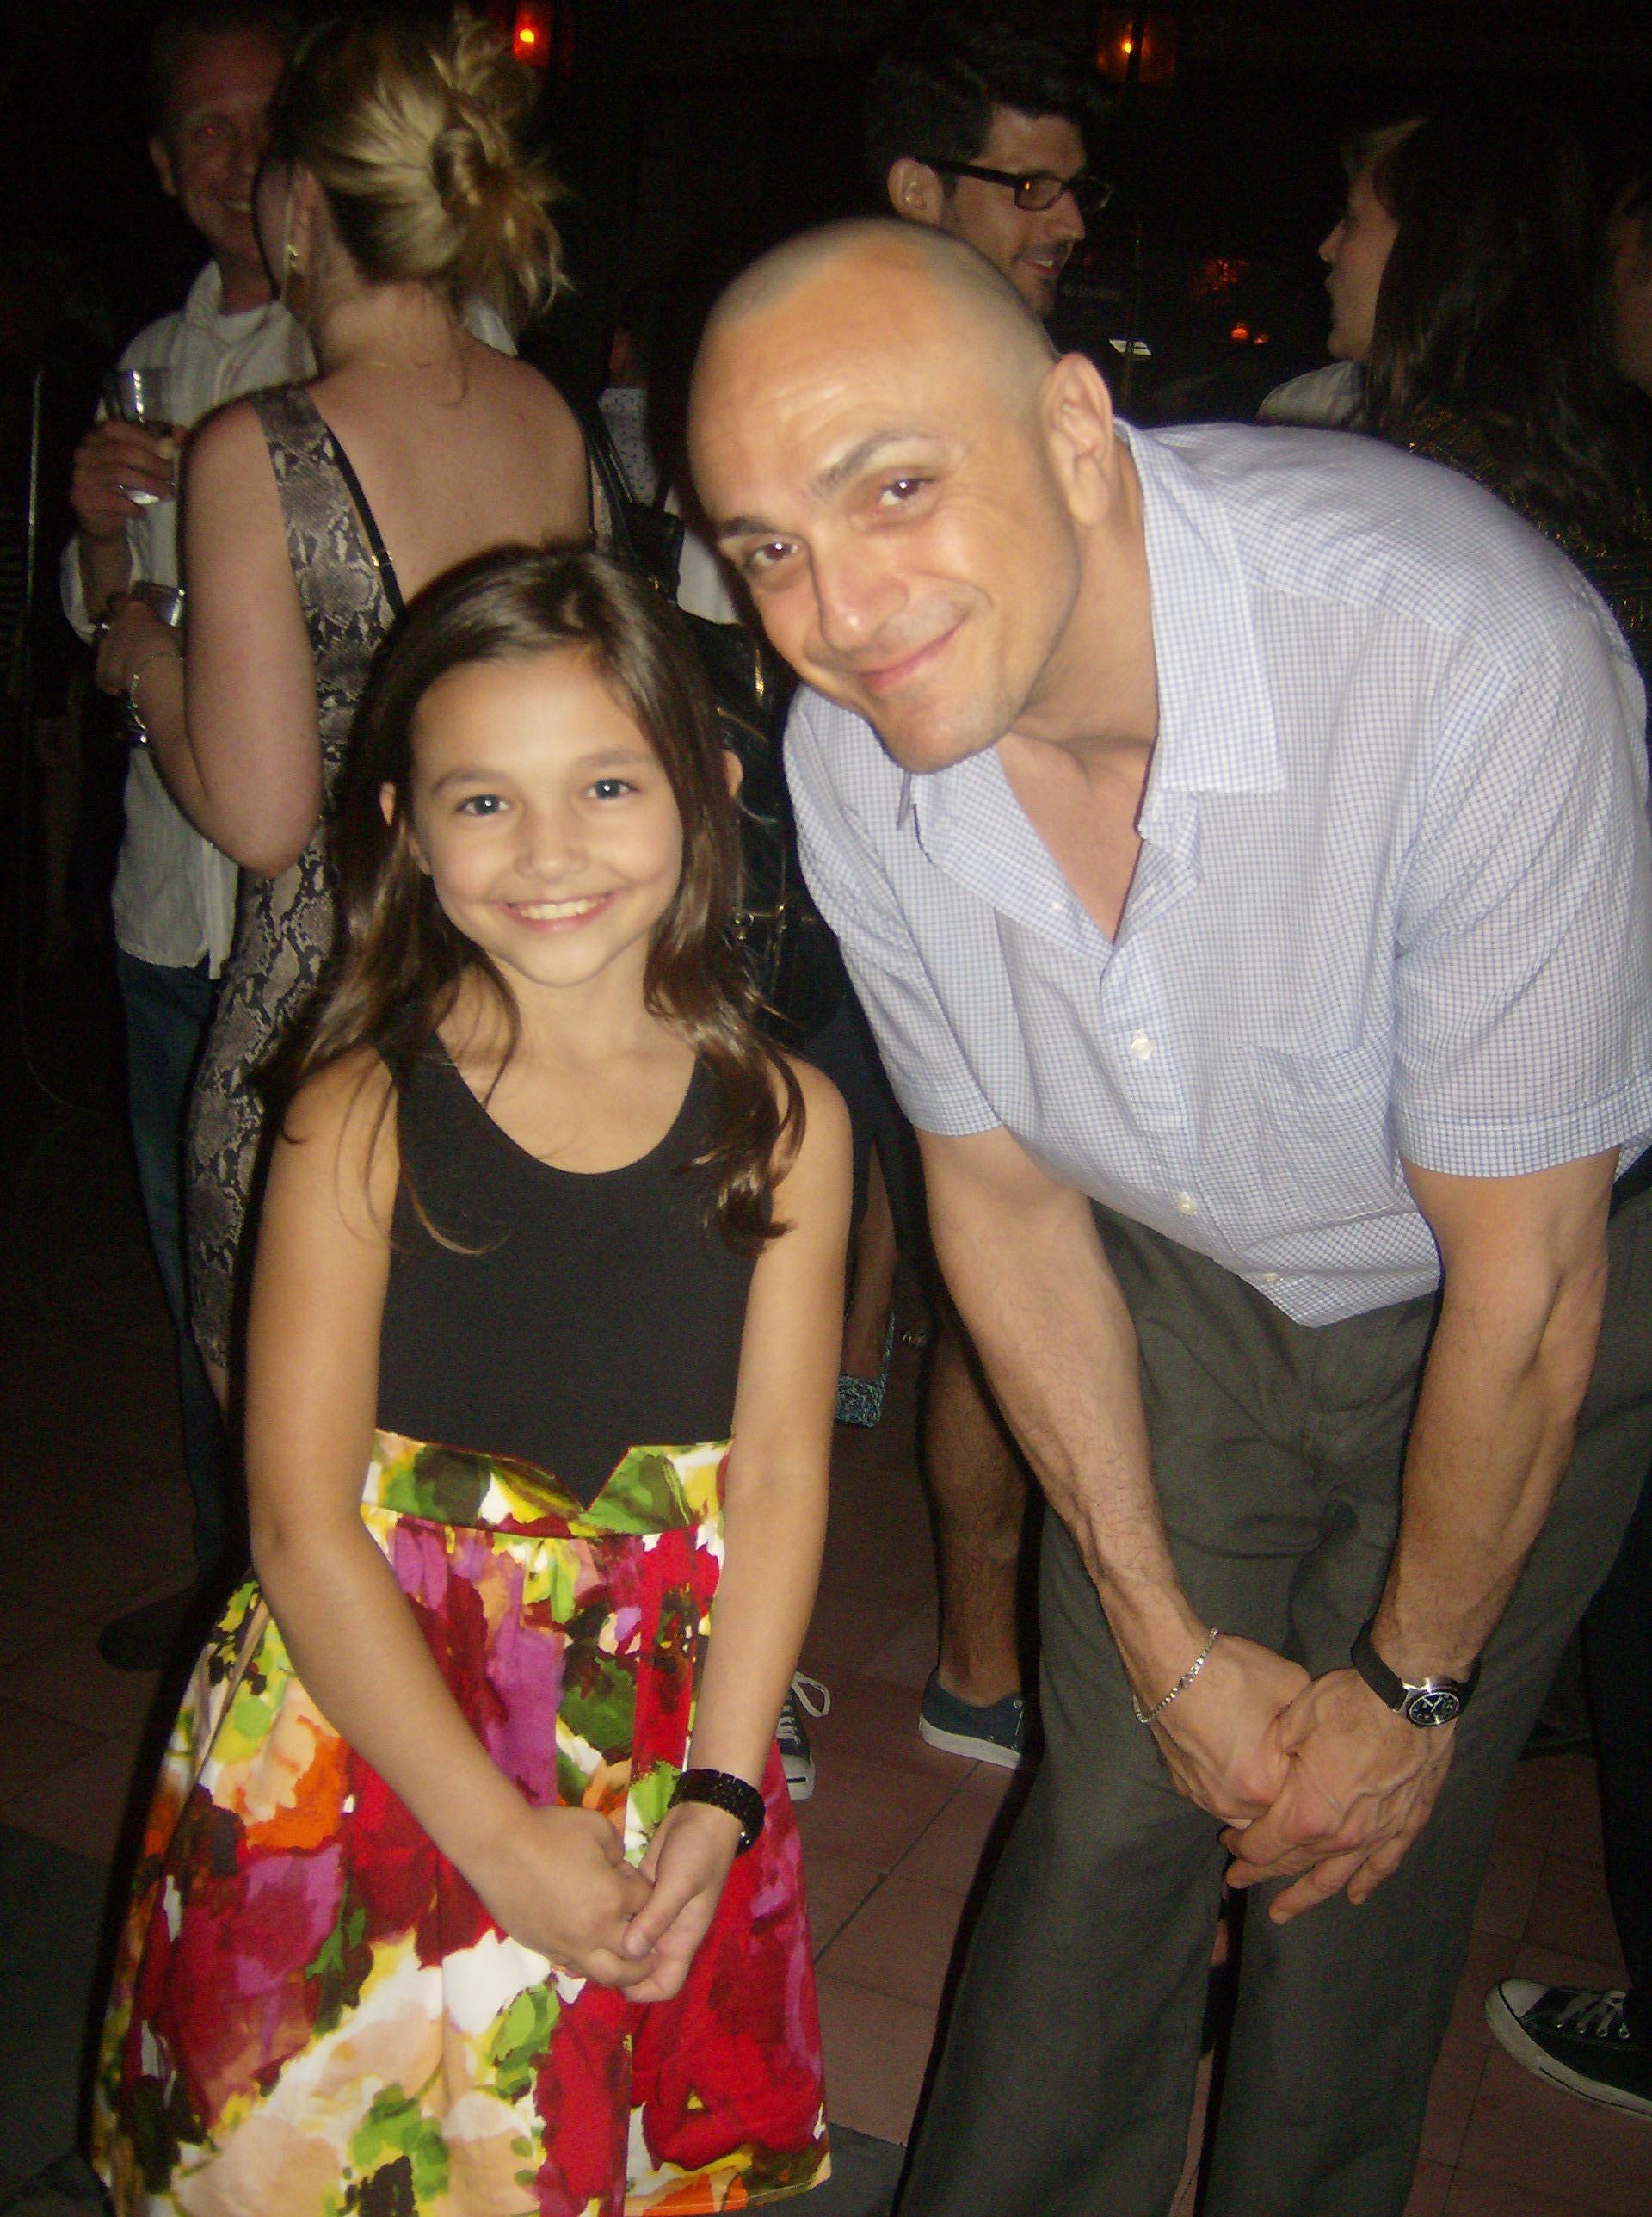 Lizzie Yousko with actor Hank Azaria (who plays Gargamel) from 